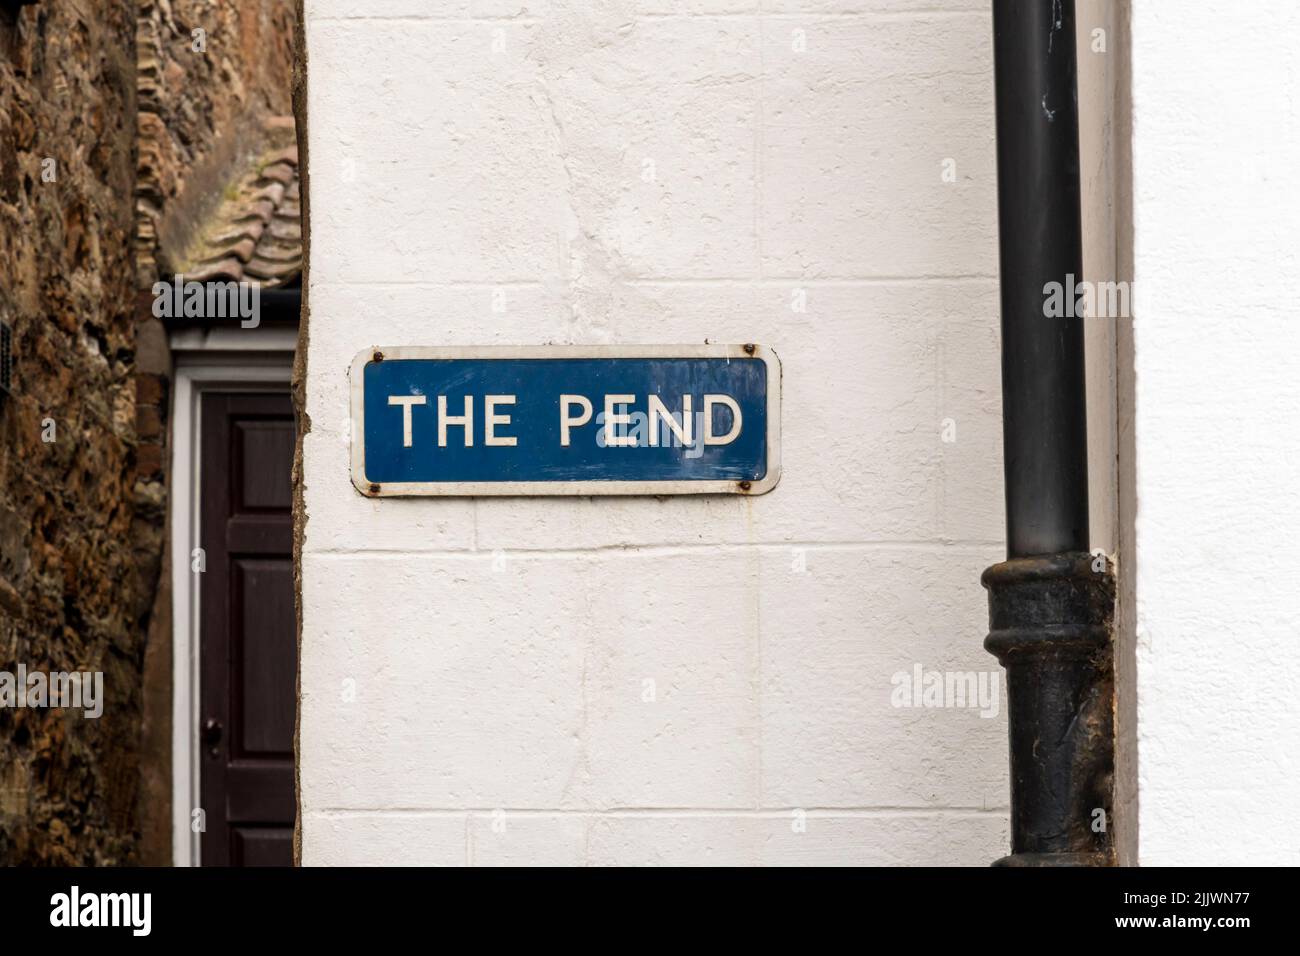 A sign for the unusual street name The Pend in St Monans, Fife. Stock Photo